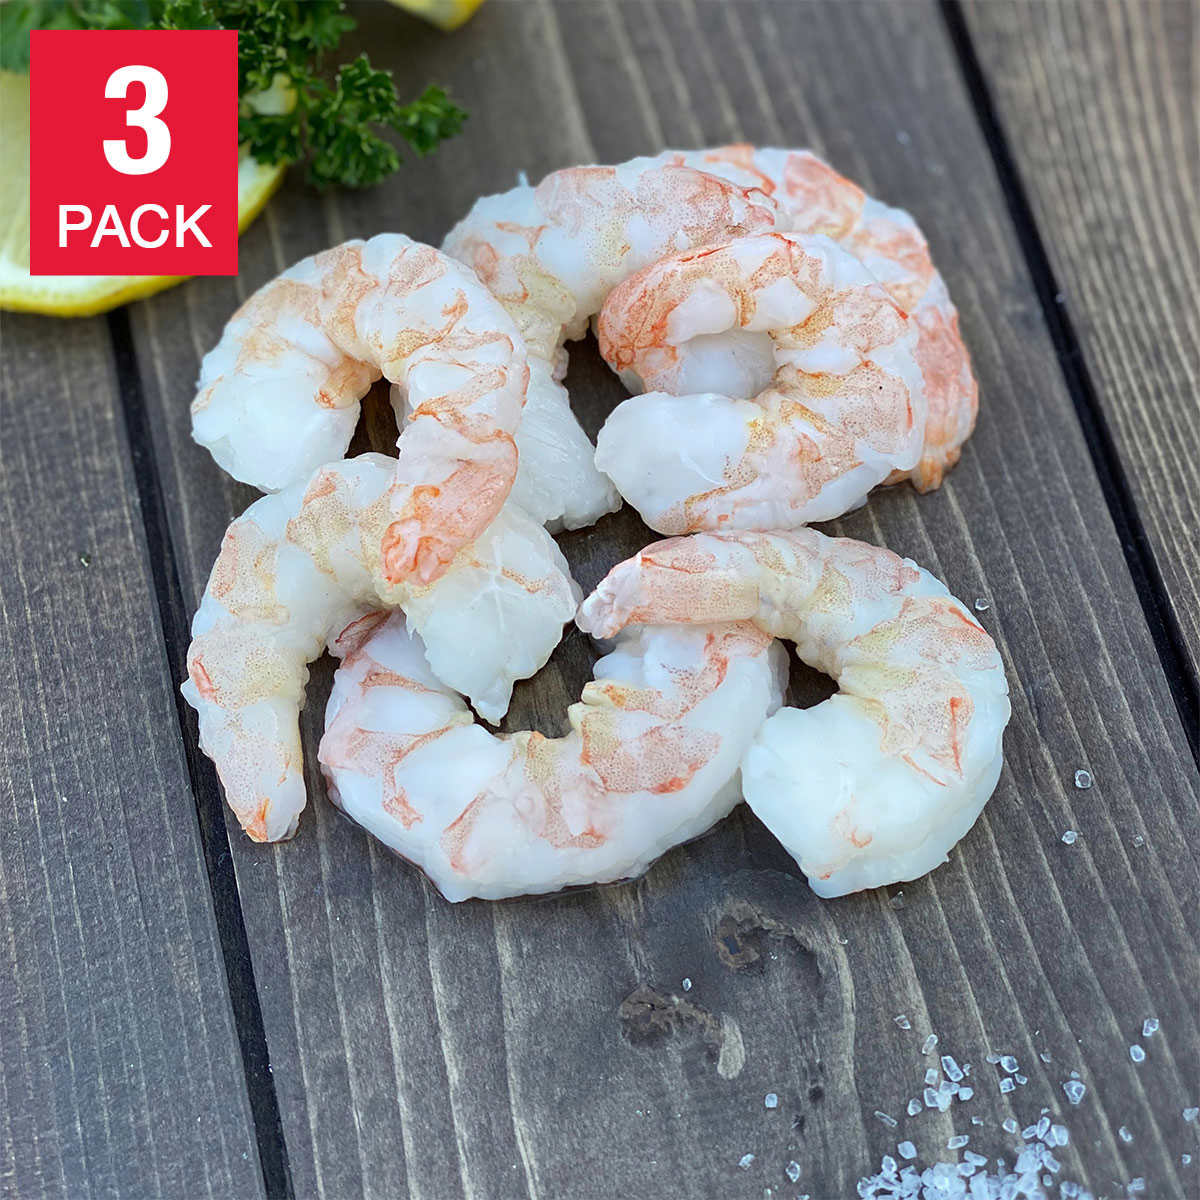 Gulf 21 30 Peeled Deveined Shrimp 2 Lb Bags 3 Pack Costco